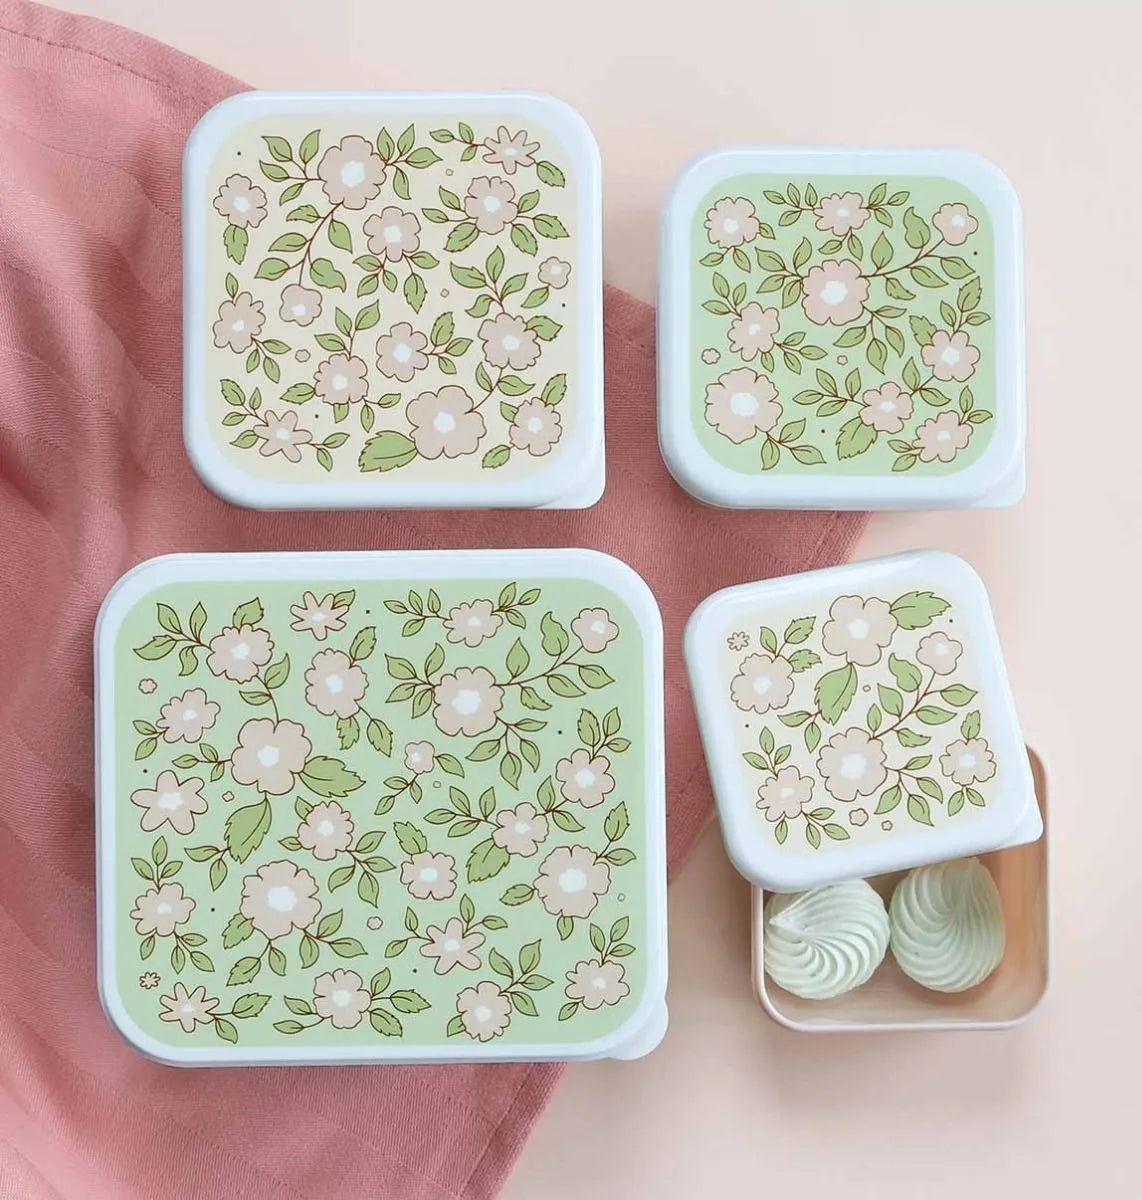 A LITTLE LOVELY COMPANY - Lunch & snack box set - Blossoms